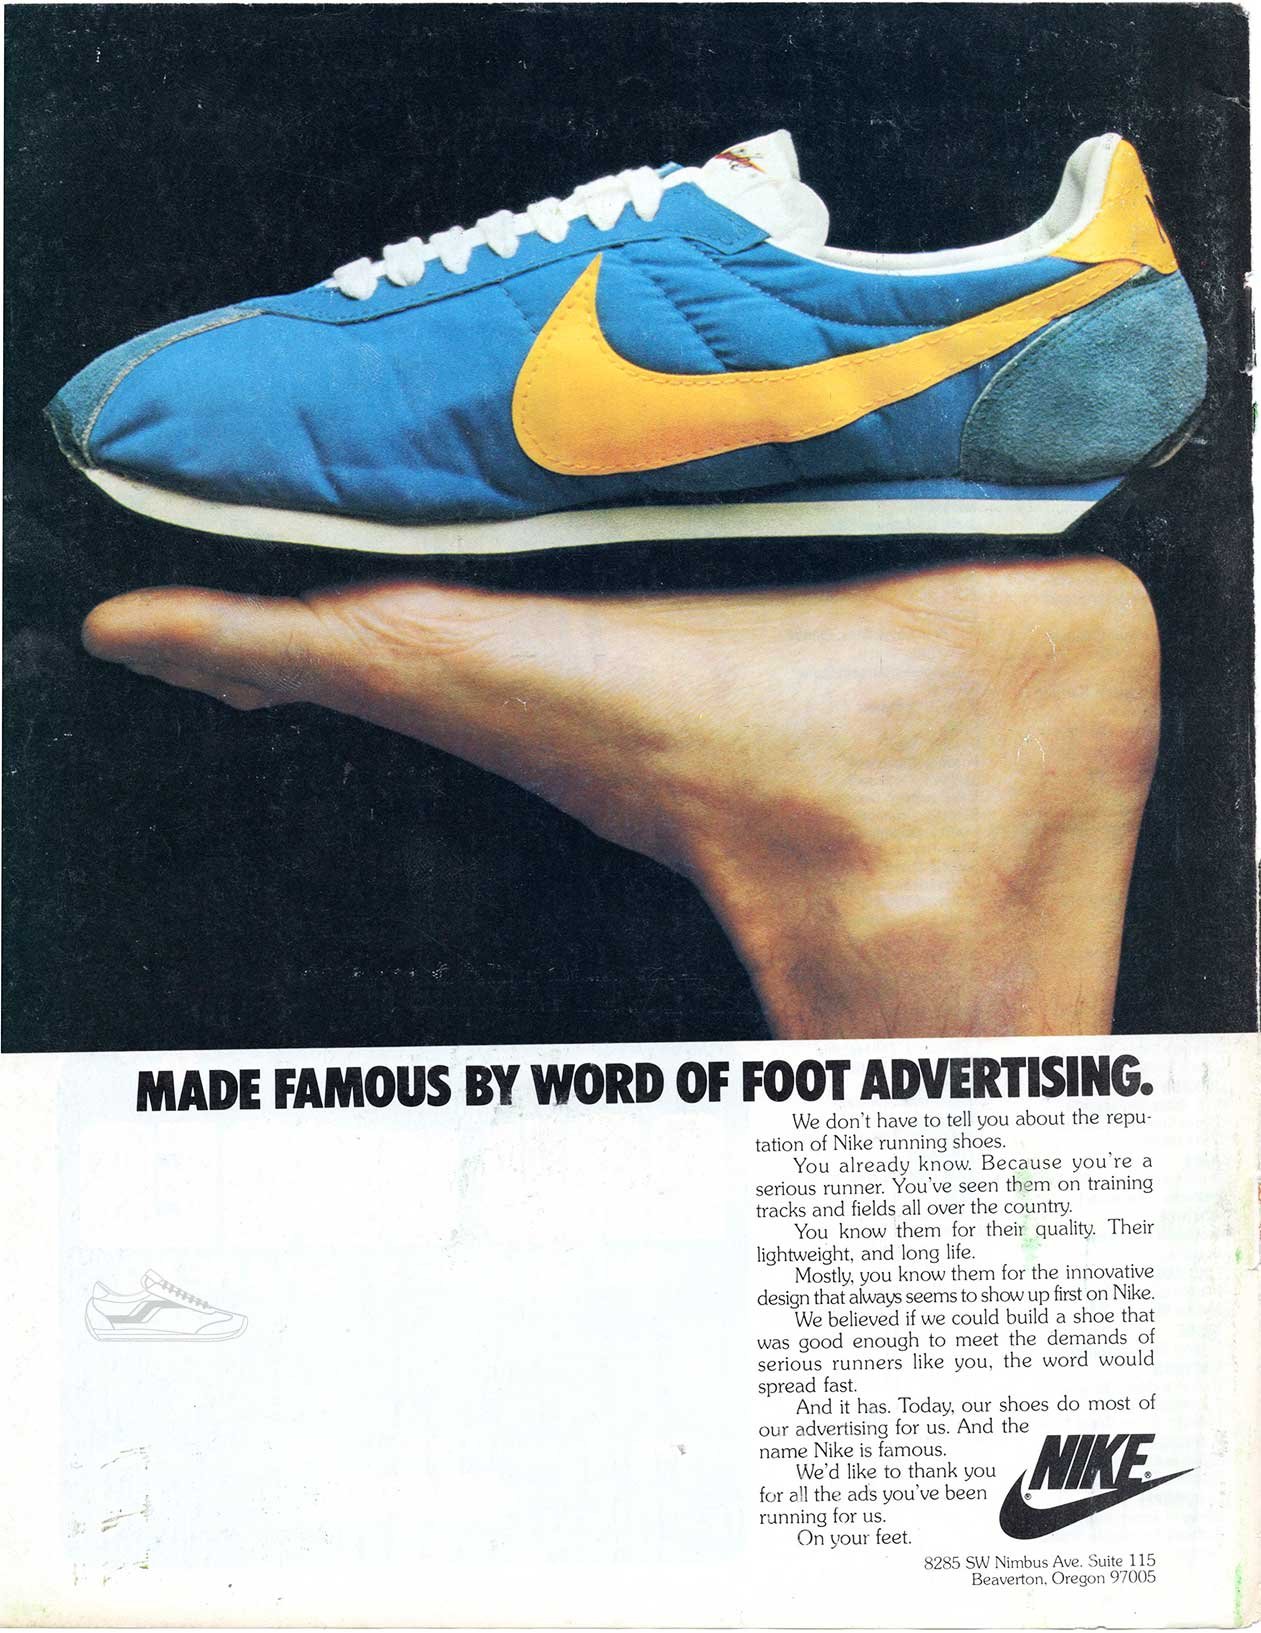 obscure vintage sneakers​ — The Deffest®. A vintage and retro sneaker blog.  — Vintage Ads